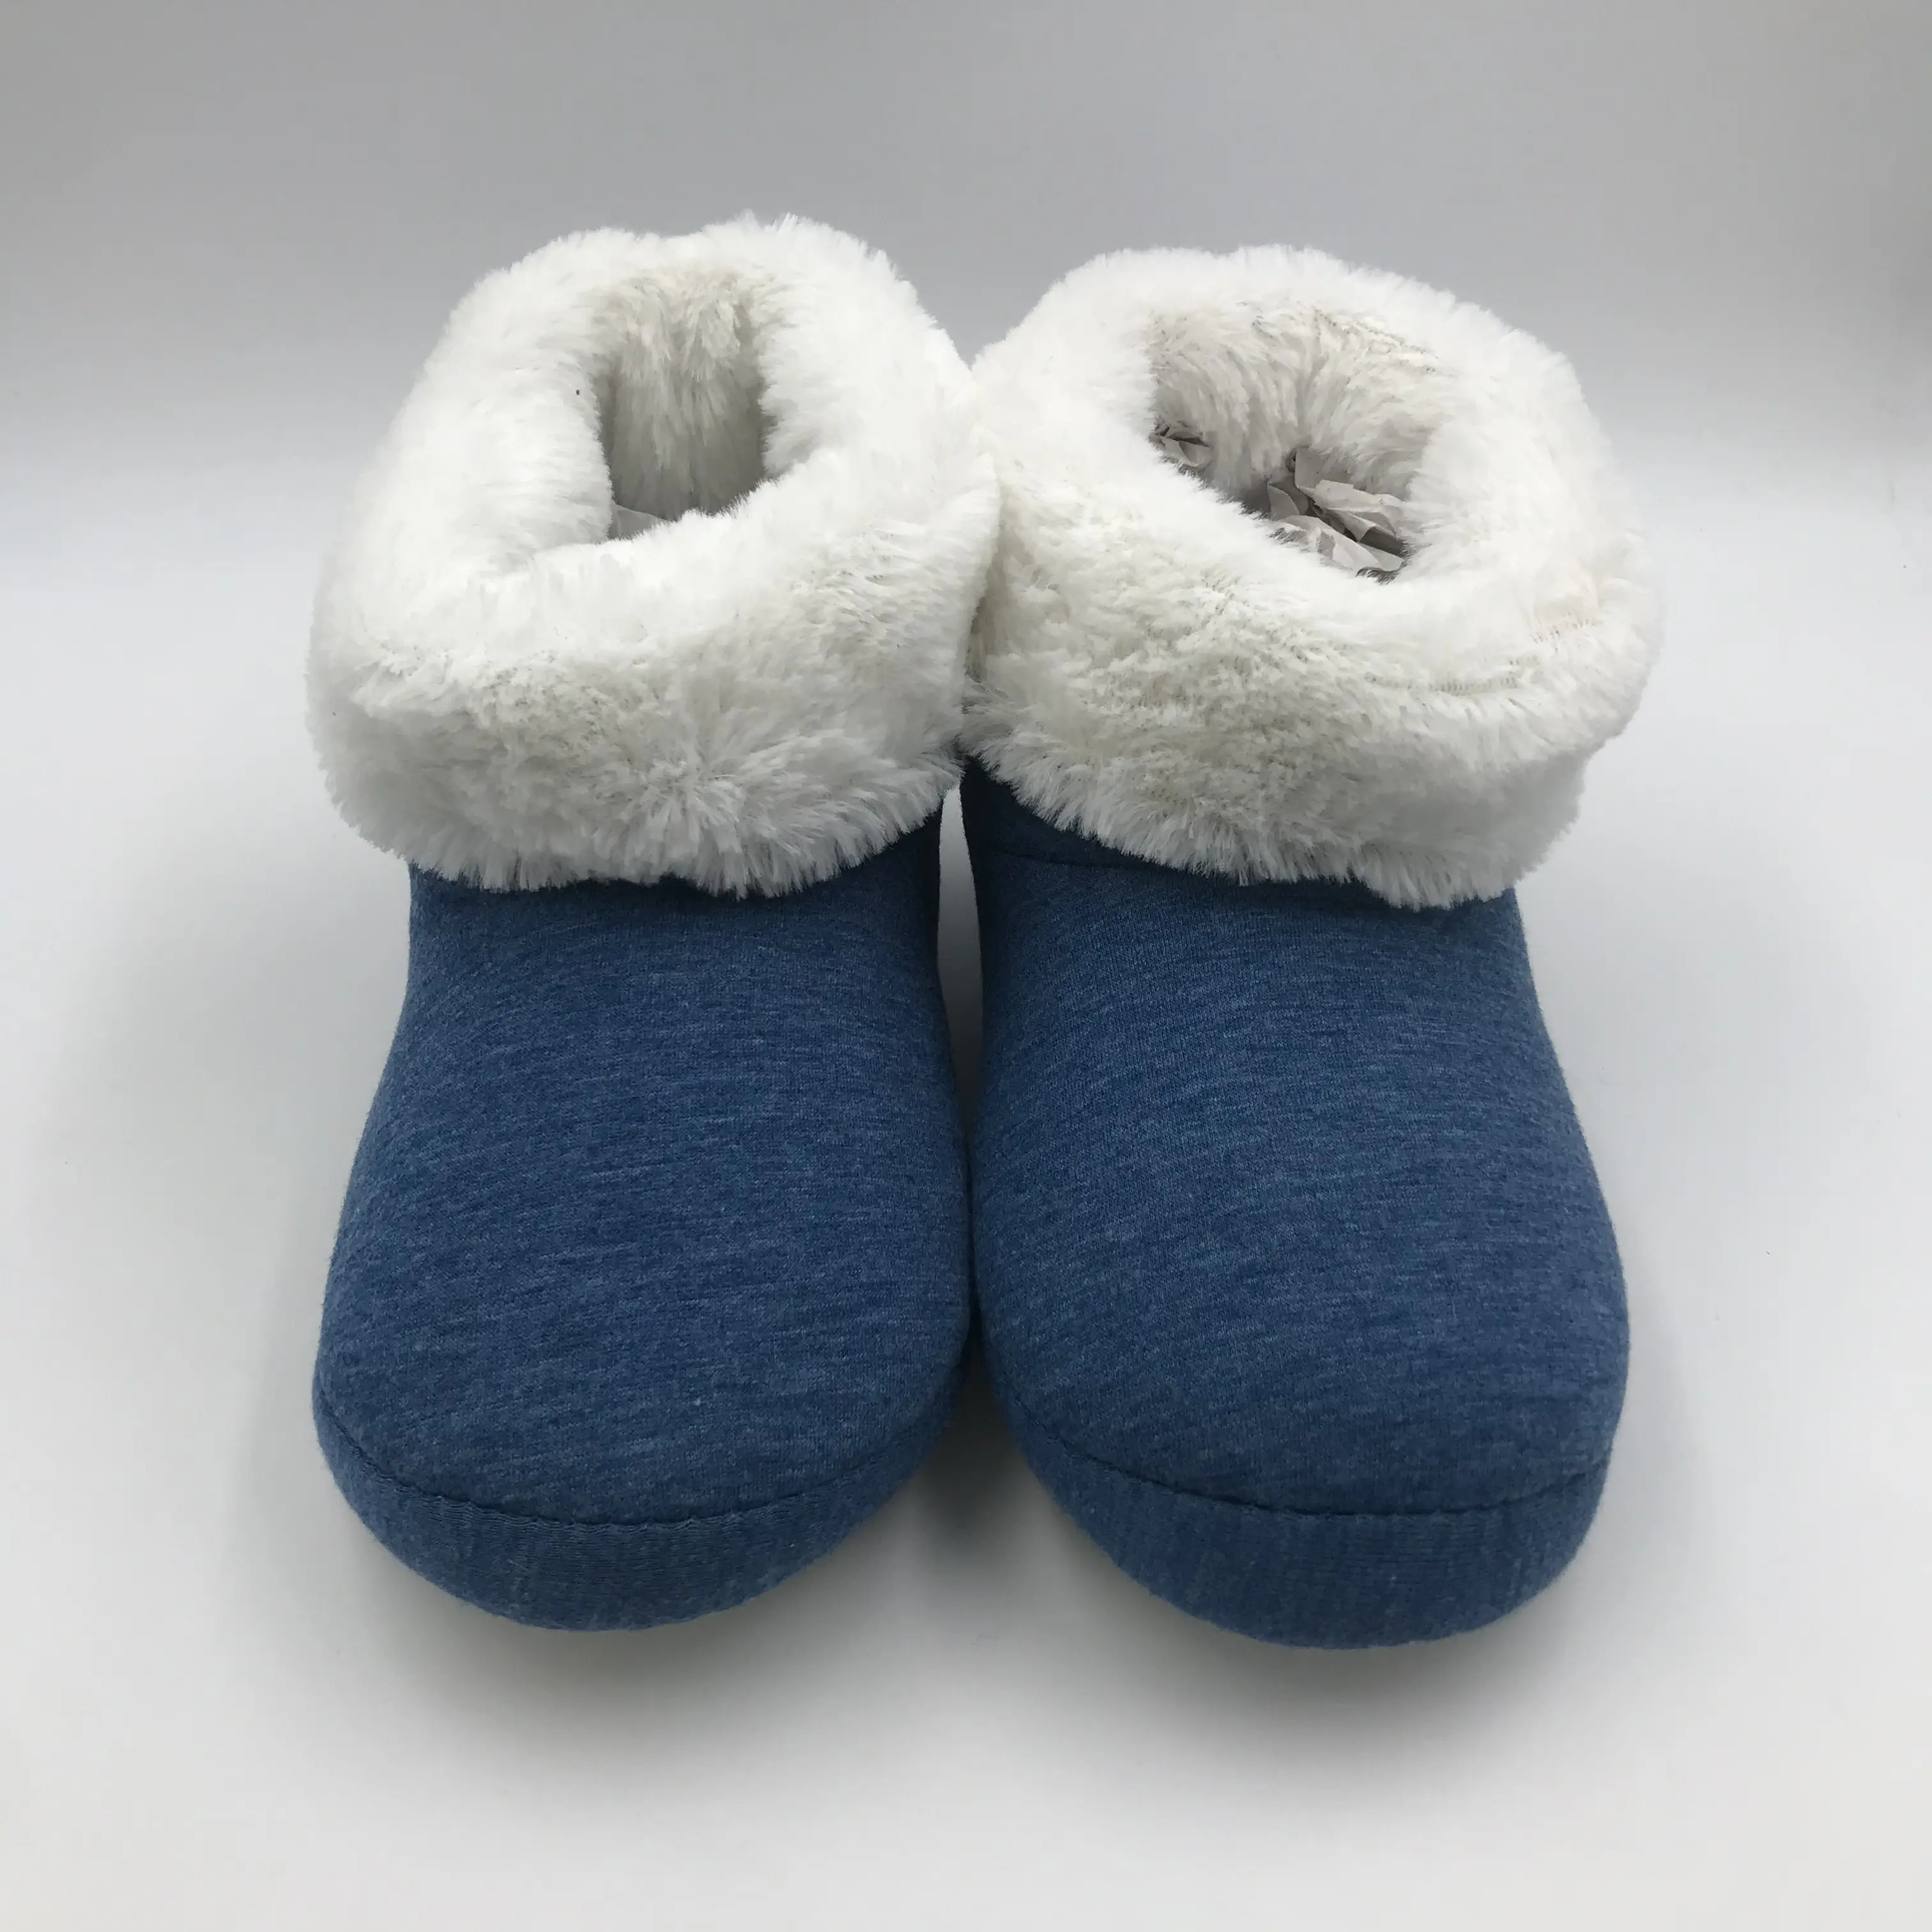 Women's Winter Furry Boots Navy Ankle Warm Bootie Slippers With Rubber Soles